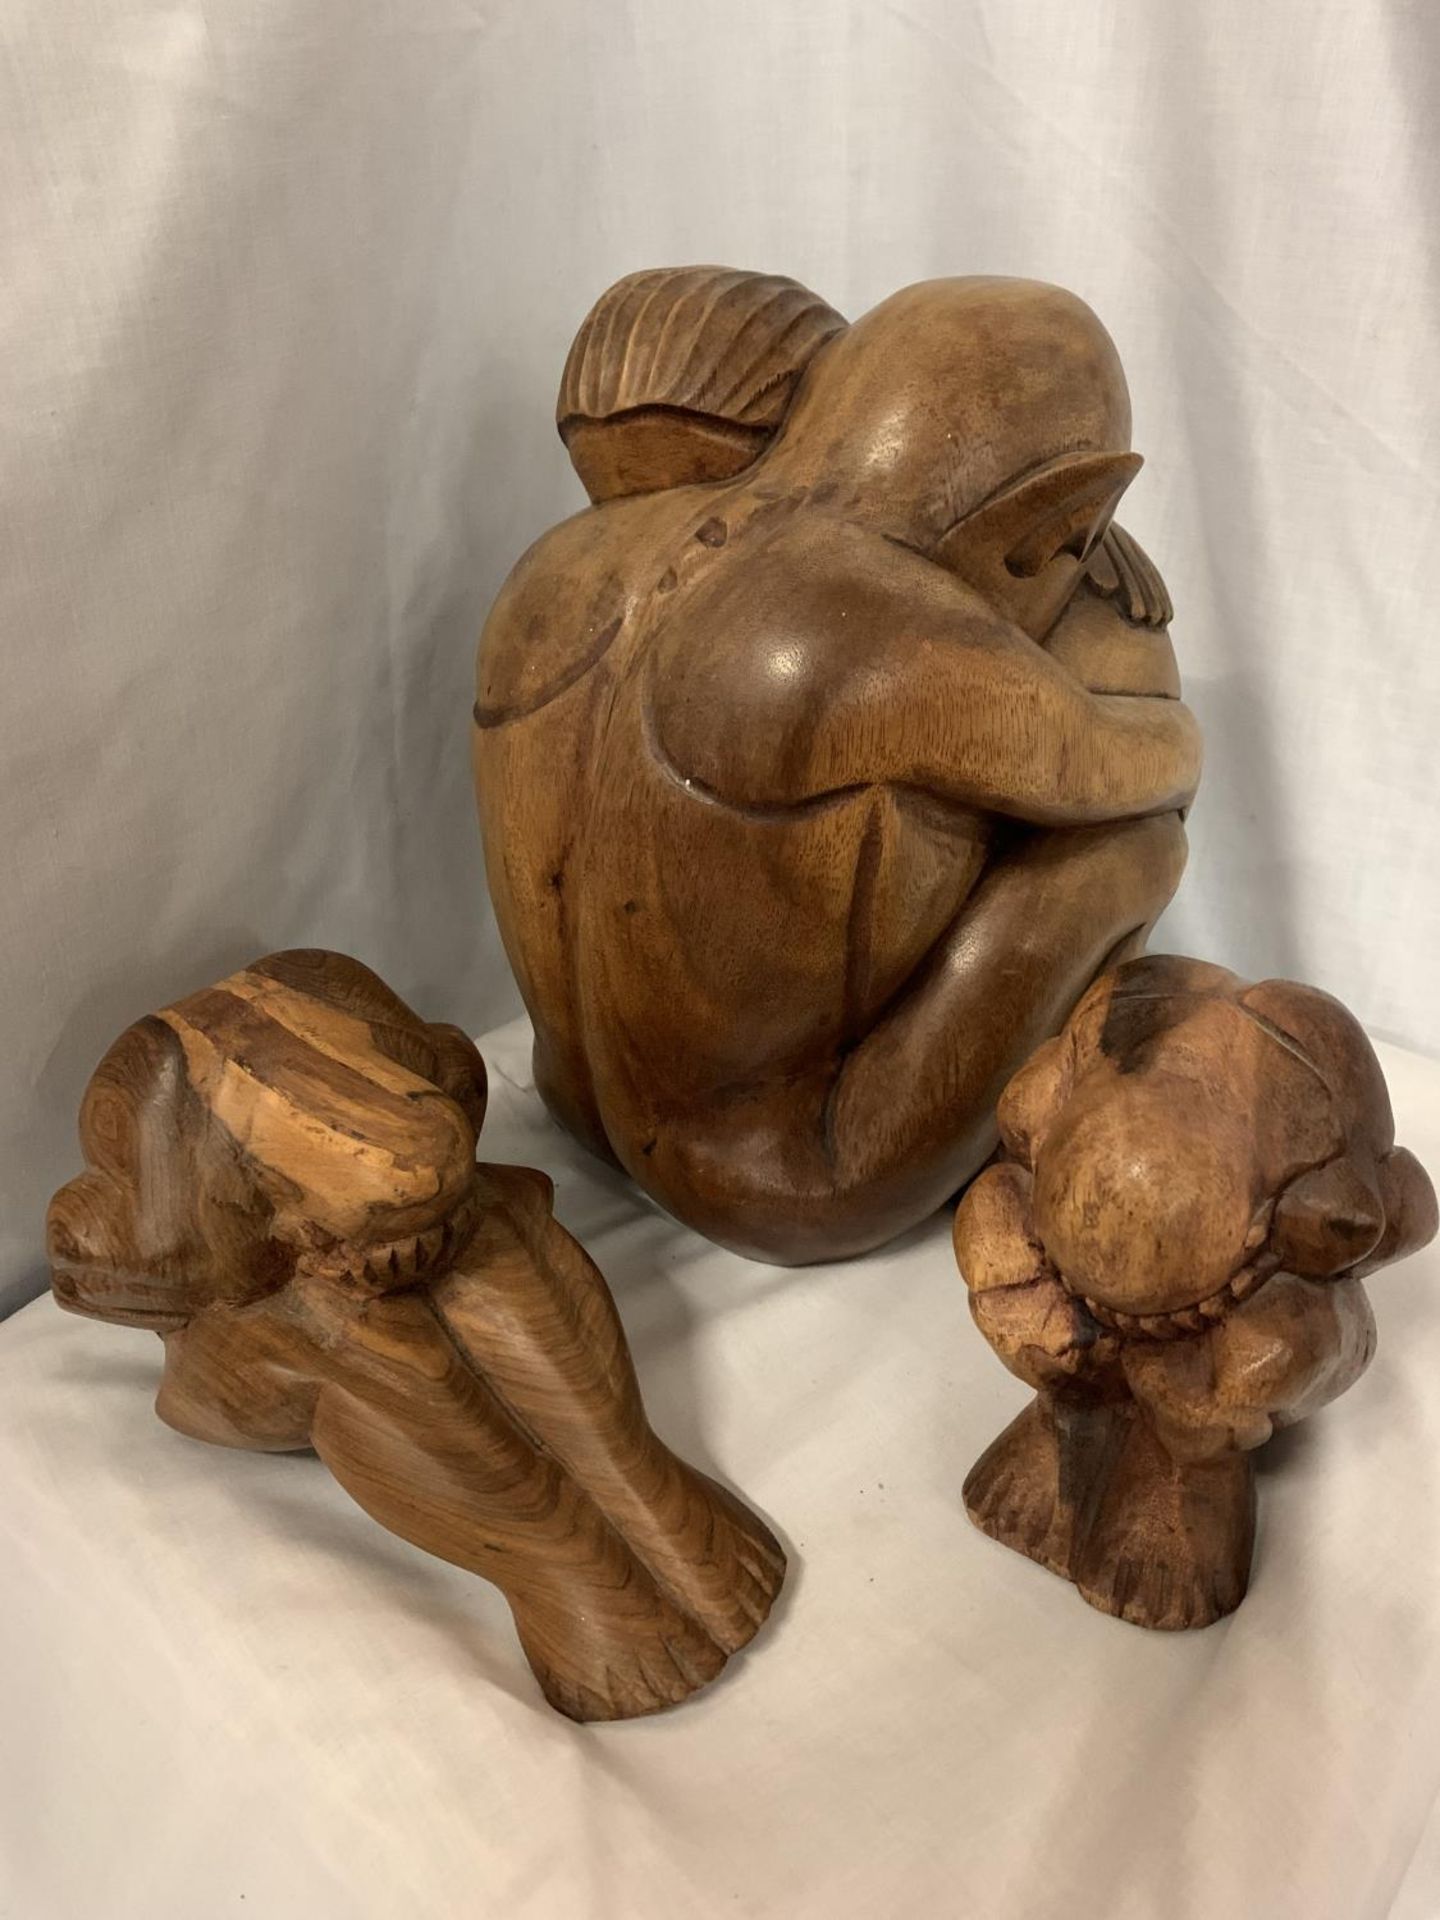 A SET OF THREE CARVED WOODEN FIGURES, ONE OF AN EMBRACING COUPLE, TWO INDIVIDUAL FIGURES